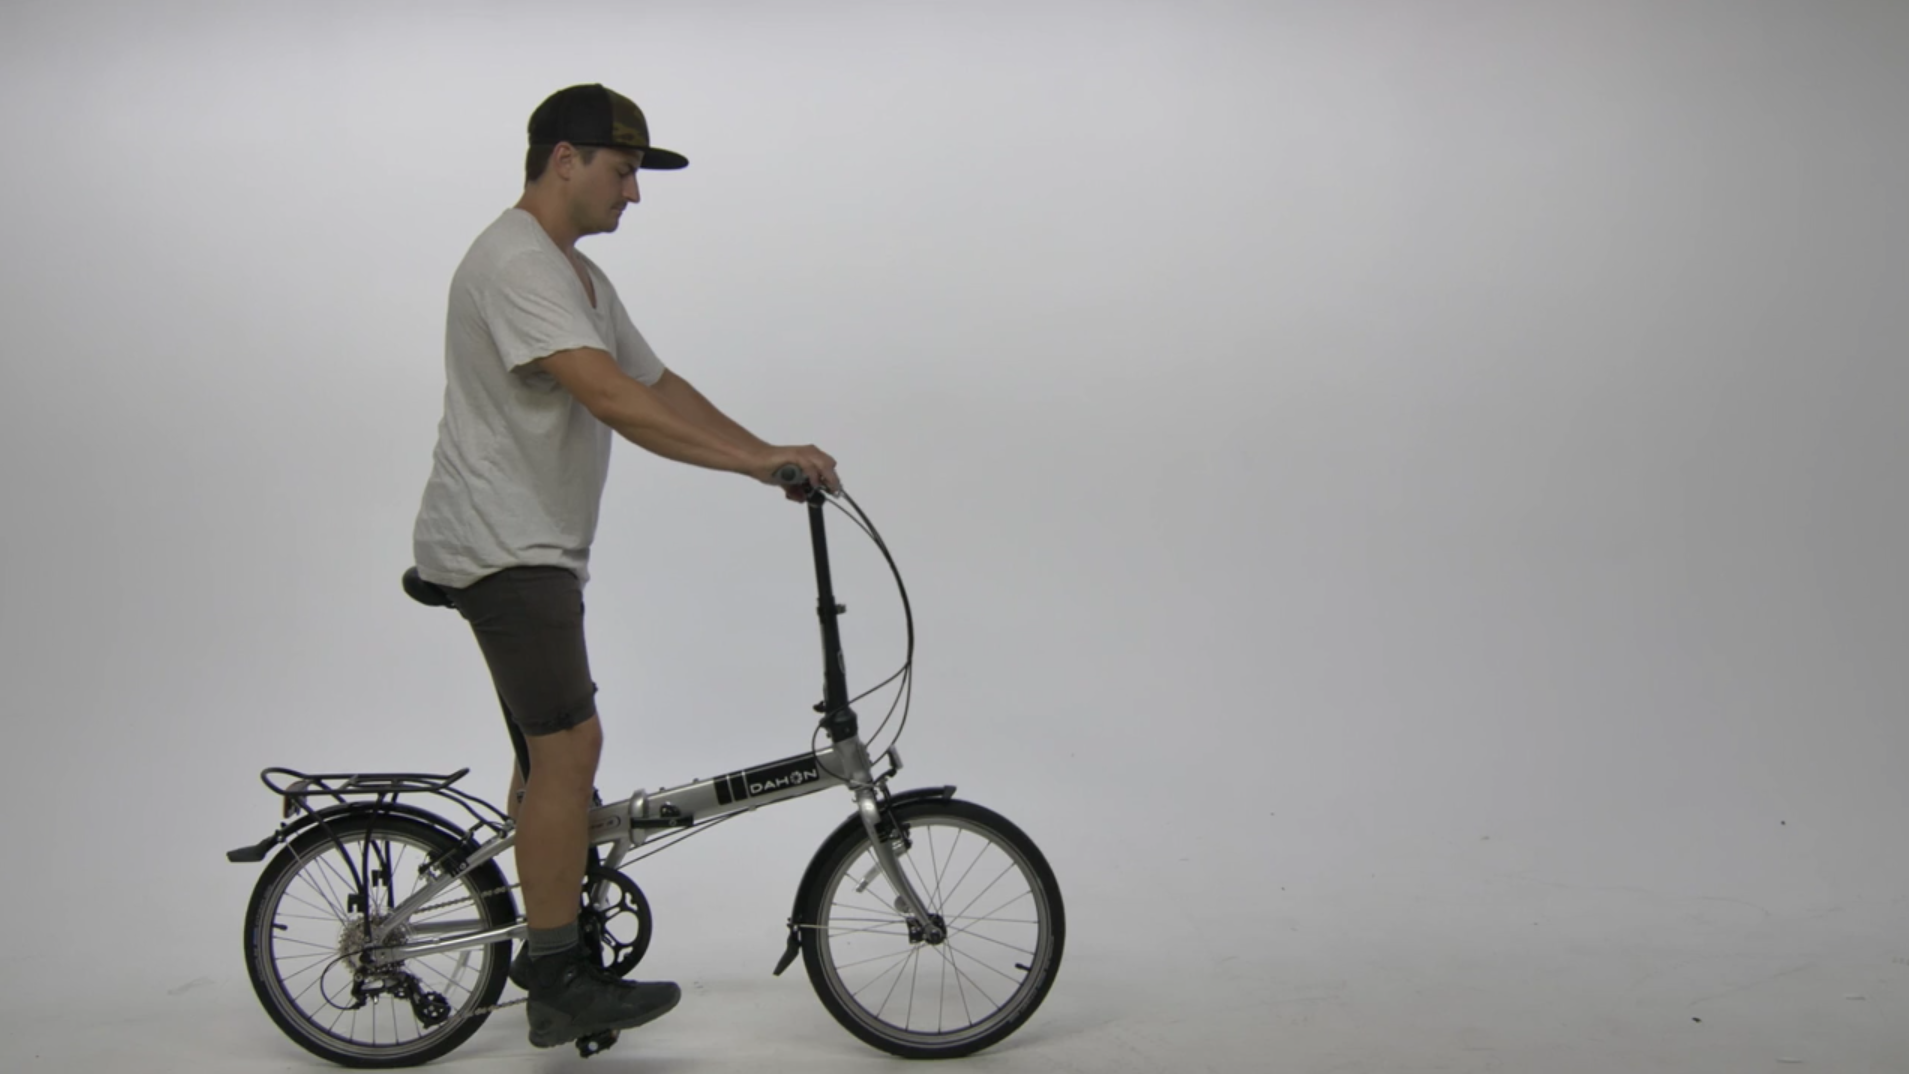 top rated folding bikes